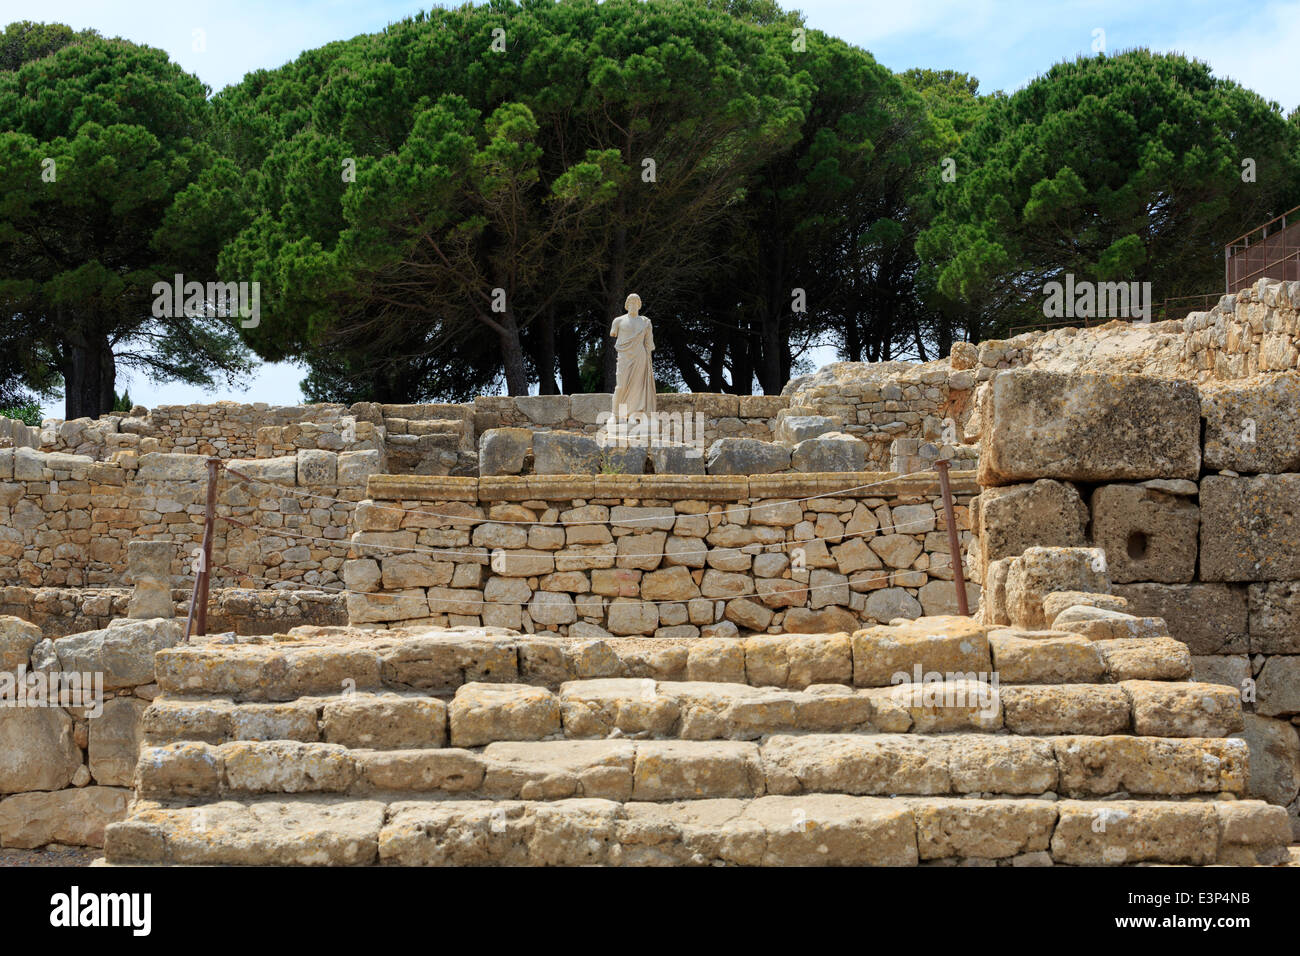 Ruins of the temple of Asklepios in the Greek City of Empuries, Catalonia, Spain Stock Photo